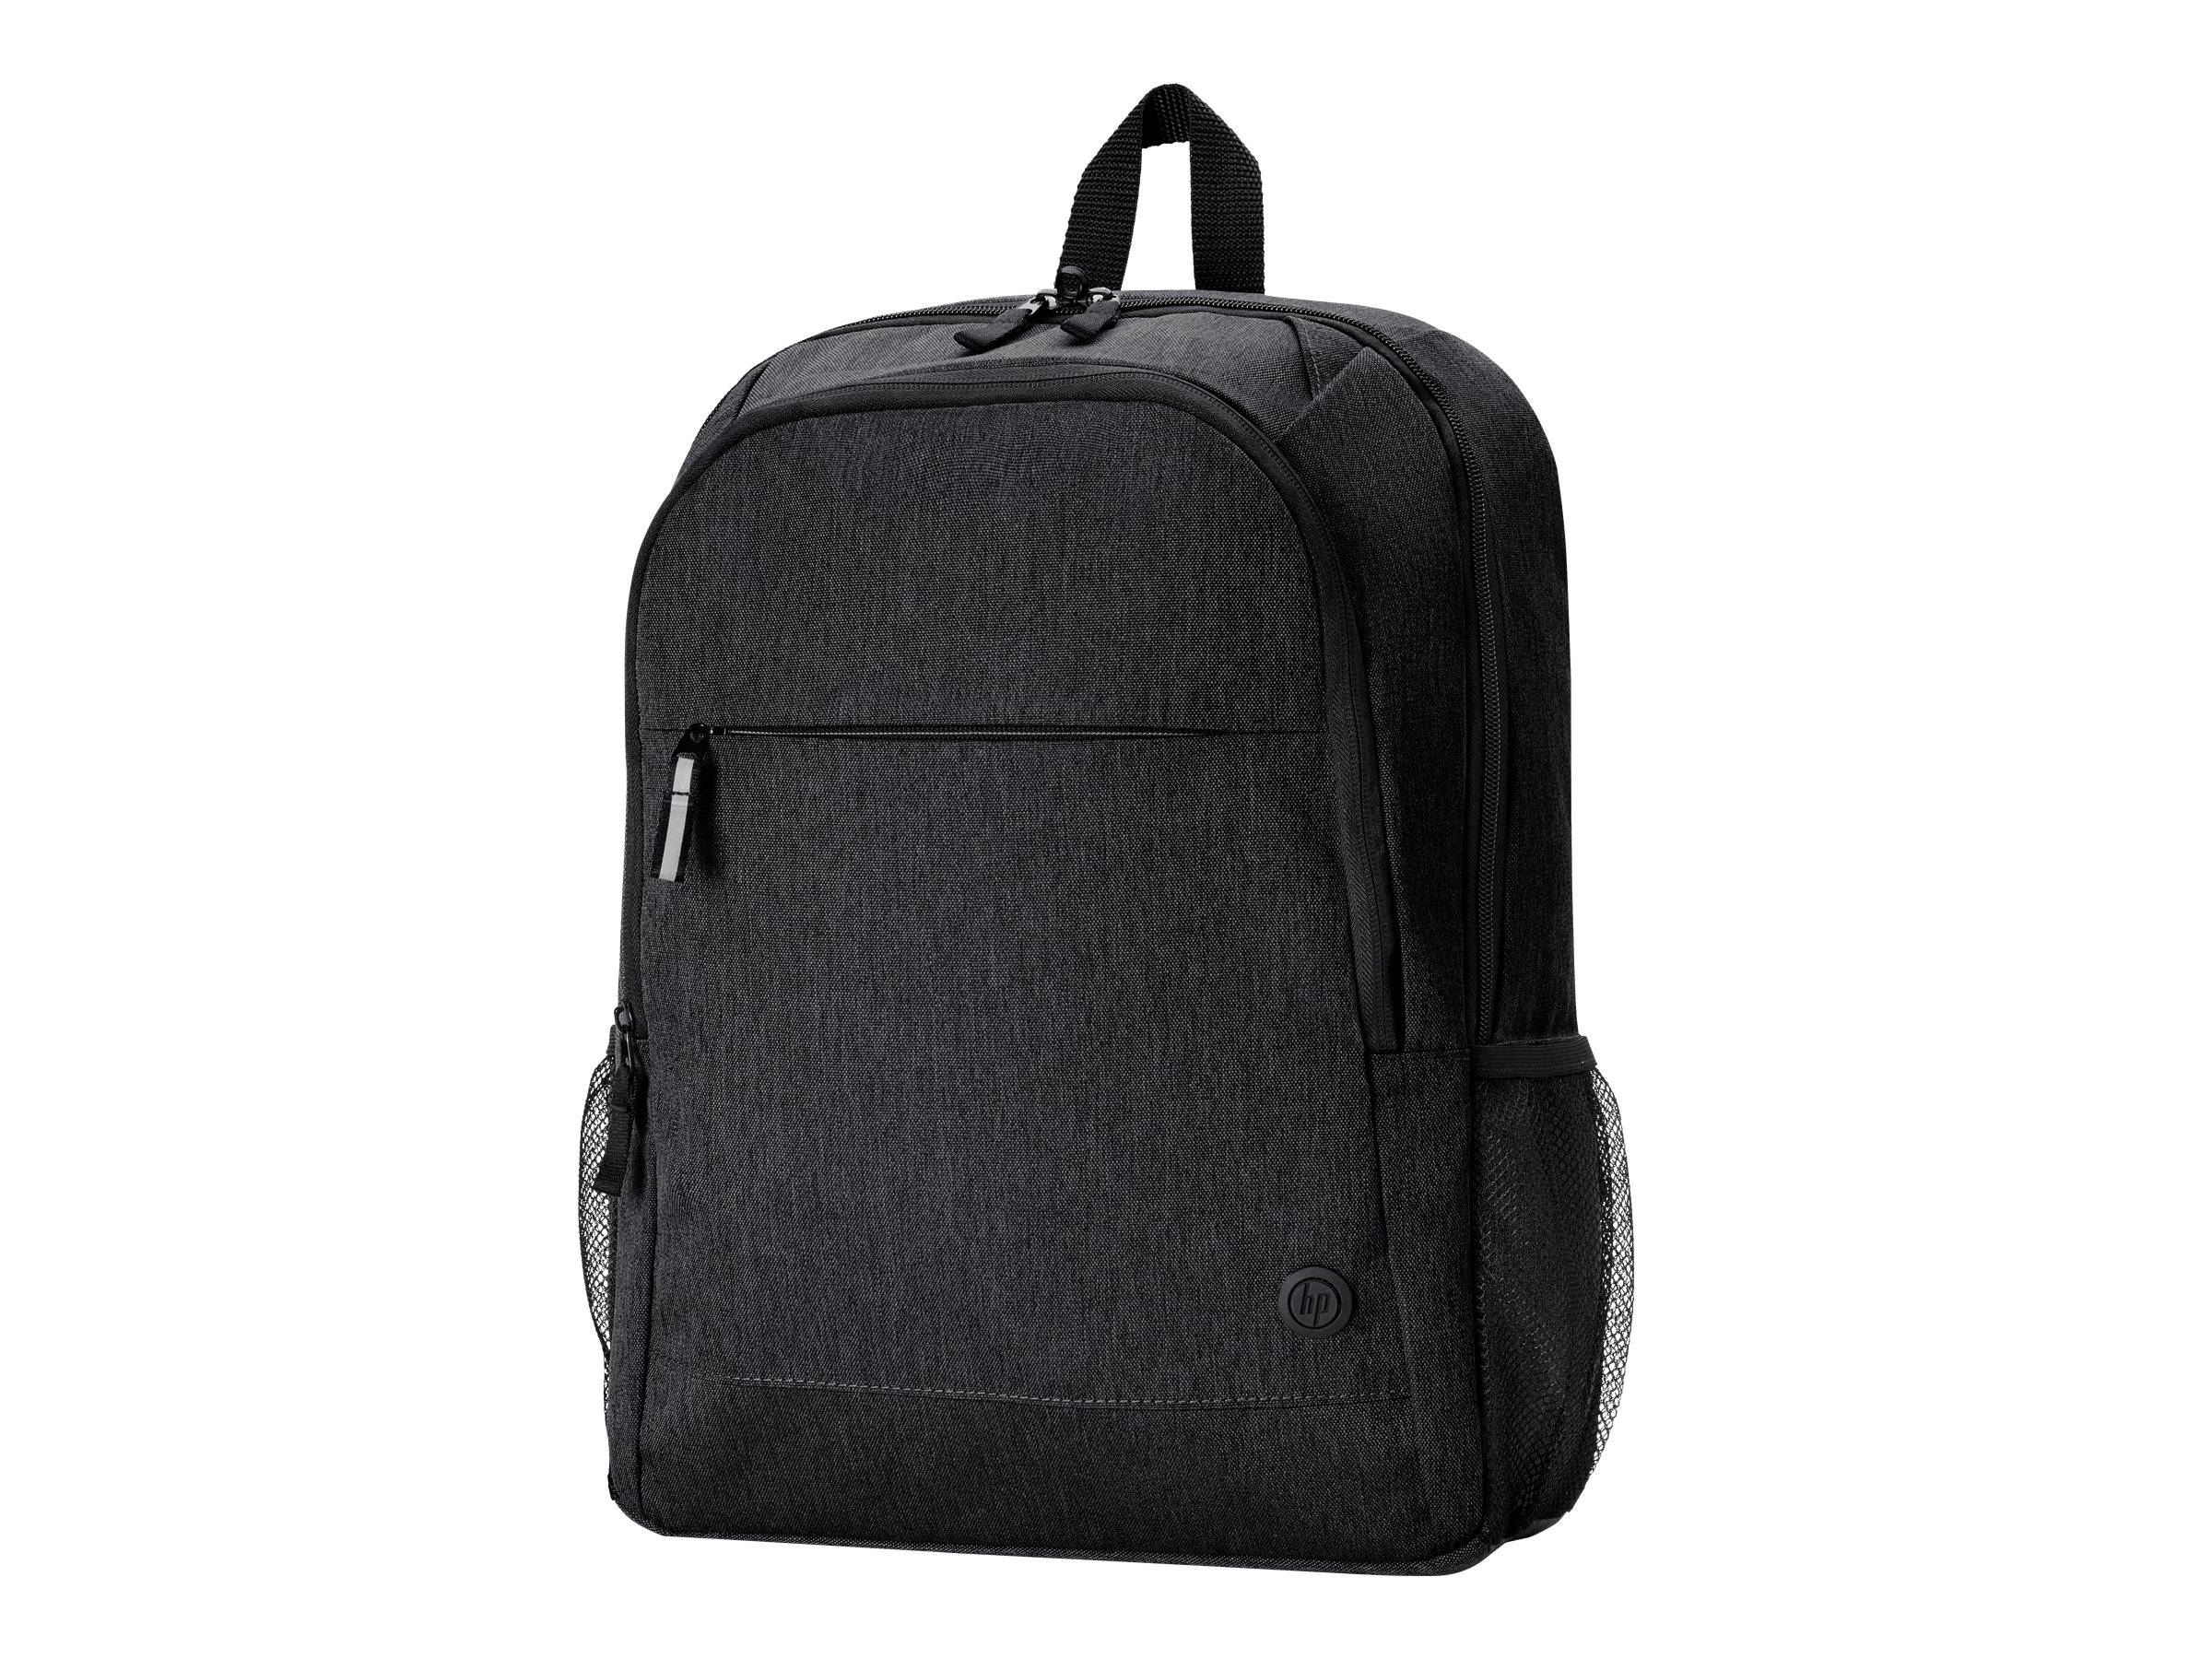 HP Prelude Pro Recycled Backpack - Sac à dos pour ordinateur portable - 15.6" - pour Elite Mobile Thin Client mt645 G7; Pro Mobile Thin Client mt440 G3; ZBook Fury 16 G10 - 1X644AA - Sacoches pour ordinateur portable